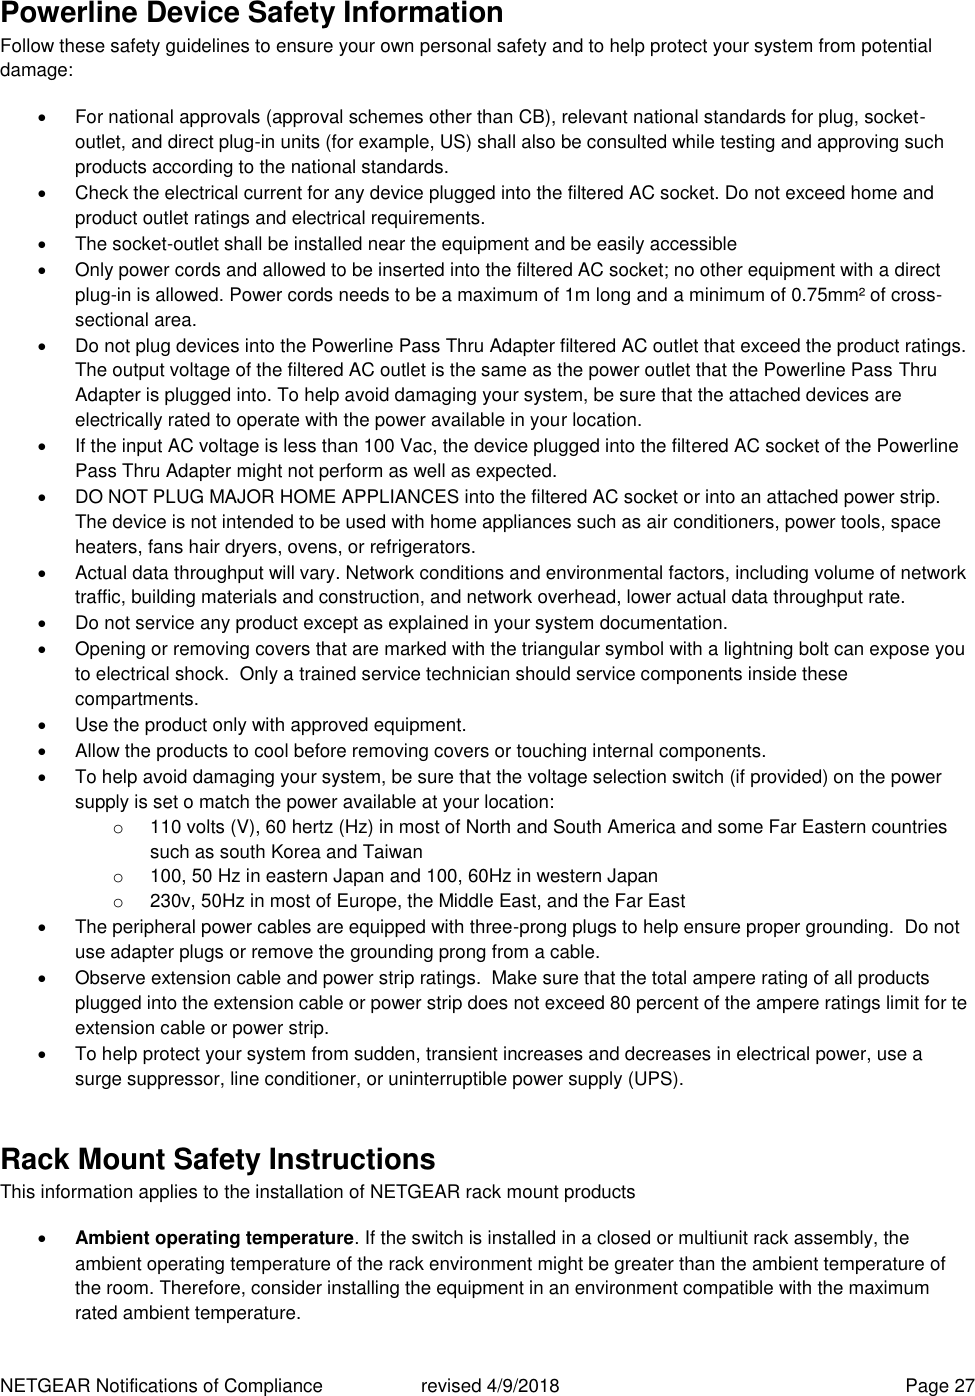 NETGEAR Notifications of Compliance    revised 4/9/2018  Page 27 Powerline Device Safety Information Follow these safety guidelines to ensure your own personal safety and to help protect your system from potential damage:   For national approvals (approval schemes other than CB), relevant national standards for plug, socket-outlet, and direct plug-in units (for example, US) shall also be consulted while testing and approving such products according to the national standards.    Check the electrical current for any device plugged into the filtered AC socket. Do not exceed home and product outlet ratings and electrical requirements.   The socket-outlet shall be installed near the equipment and be easily accessible   Only power cords and allowed to be inserted into the filtered AC socket; no other equipment with a direct plug-in is allowed. Power cords needs to be a maximum of 1m long and a minimum of 0.75mm² of cross-sectional area.   Do not plug devices into the Powerline Pass Thru Adapter filtered AC outlet that exceed the product ratings.  The output voltage of the filtered AC outlet is the same as the power outlet that the Powerline Pass Thru Adapter is plugged into. To help avoid damaging your system, be sure that the attached devices are electrically rated to operate with the power available in your location.   If the input AC voltage is less than 100 Vac, the device plugged into the filtered AC socket of the Powerline Pass Thru Adapter might not perform as well as expected.   DO NOT PLUG MAJOR HOME APPLIANCES into the filtered AC socket or into an attached power strip.  The device is not intended to be used with home appliances such as air conditioners, power tools, space heaters, fans hair dryers, ovens, or refrigerators.    Actual data throughput will vary. Network conditions and environmental factors, including volume of network traffic, building materials and construction, and network overhead, lower actual data throughput rate.    Do not service any product except as explained in your system documentation.    Opening or removing covers that are marked with the triangular symbol with a lightning bolt can expose you to electrical shock.  Only a trained service technician should service components inside these compartments.   Use the product only with approved equipment.   Allow the products to cool before removing covers or touching internal components.   To help avoid damaging your system, be sure that the voltage selection switch (if provided) on the power supply is set o match the power available at your location: o  110 volts (V), 60 hertz (Hz) in most of North and South America and some Far Eastern countries such as south Korea and Taiwan o  100, 50 Hz in eastern Japan and 100, 60Hz in western Japan o  230v, 50Hz in most of Europe, the Middle East, and the Far East   The peripheral power cables are equipped with three-prong plugs to help ensure proper grounding.  Do not use adapter plugs or remove the grounding prong from a cable.   Observe extension cable and power strip ratings.  Make sure that the total ampere rating of all products plugged into the extension cable or power strip does not exceed 80 percent of the ampere ratings limit for te extension cable or power strip.   To help protect your system from sudden, transient increases and decreases in electrical power, use a surge suppressor, line conditioner, or uninterruptible power supply (UPS). Rack Mount Safety Instructions This information applies to the installation of NETGEAR rack mount products  Ambient operating temperature. If the switch is installed in a closed or multiunit rack assembly, the ambient operating temperature of the rack environment might be greater than the ambient temperature of the room. Therefore, consider installing the equipment in an environment compatible with the maximum rated ambient temperature. 